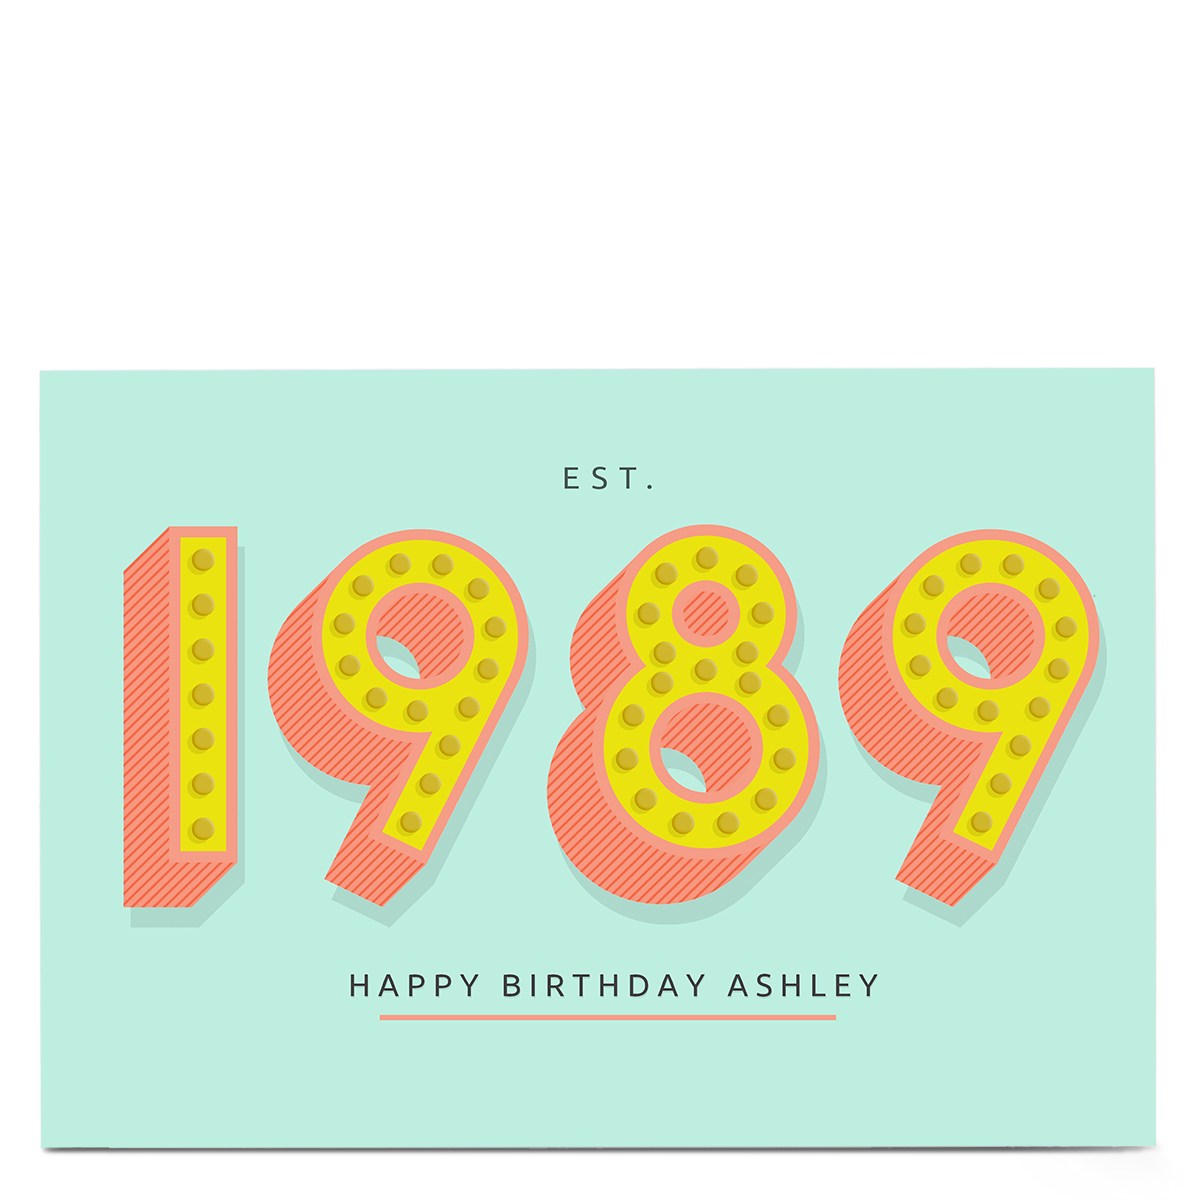 Personalised Birthday Card - Est. Any Year